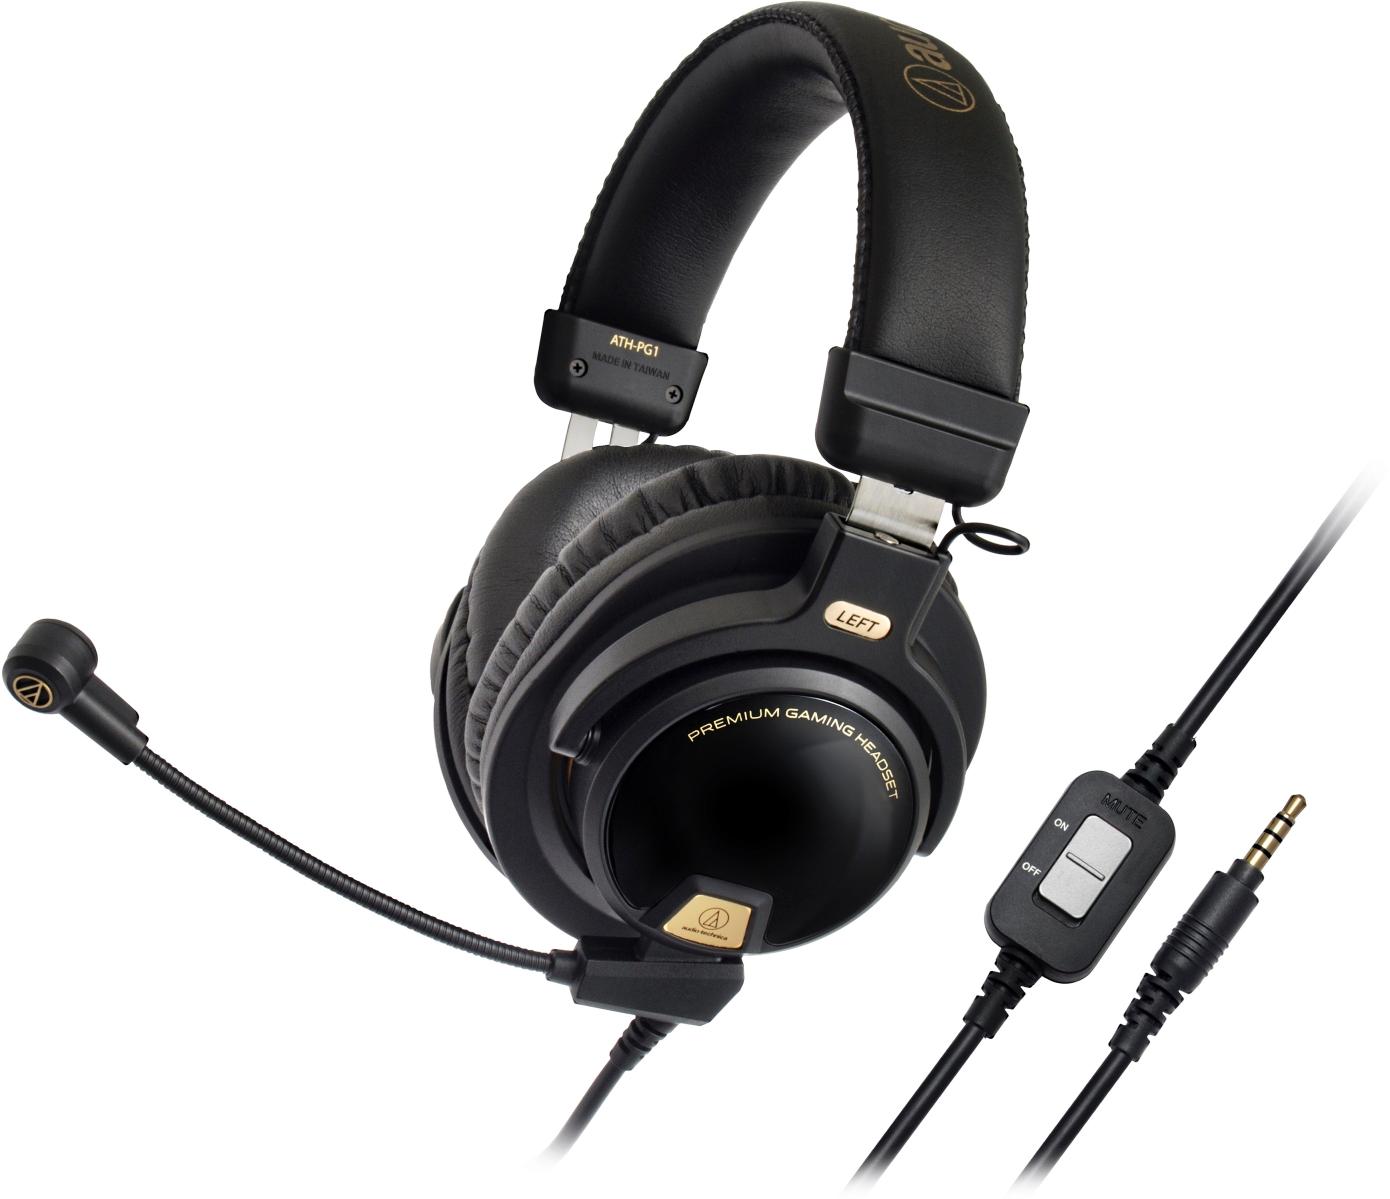 Tai nghe gaming Audio-Technica ATH-PG1_3